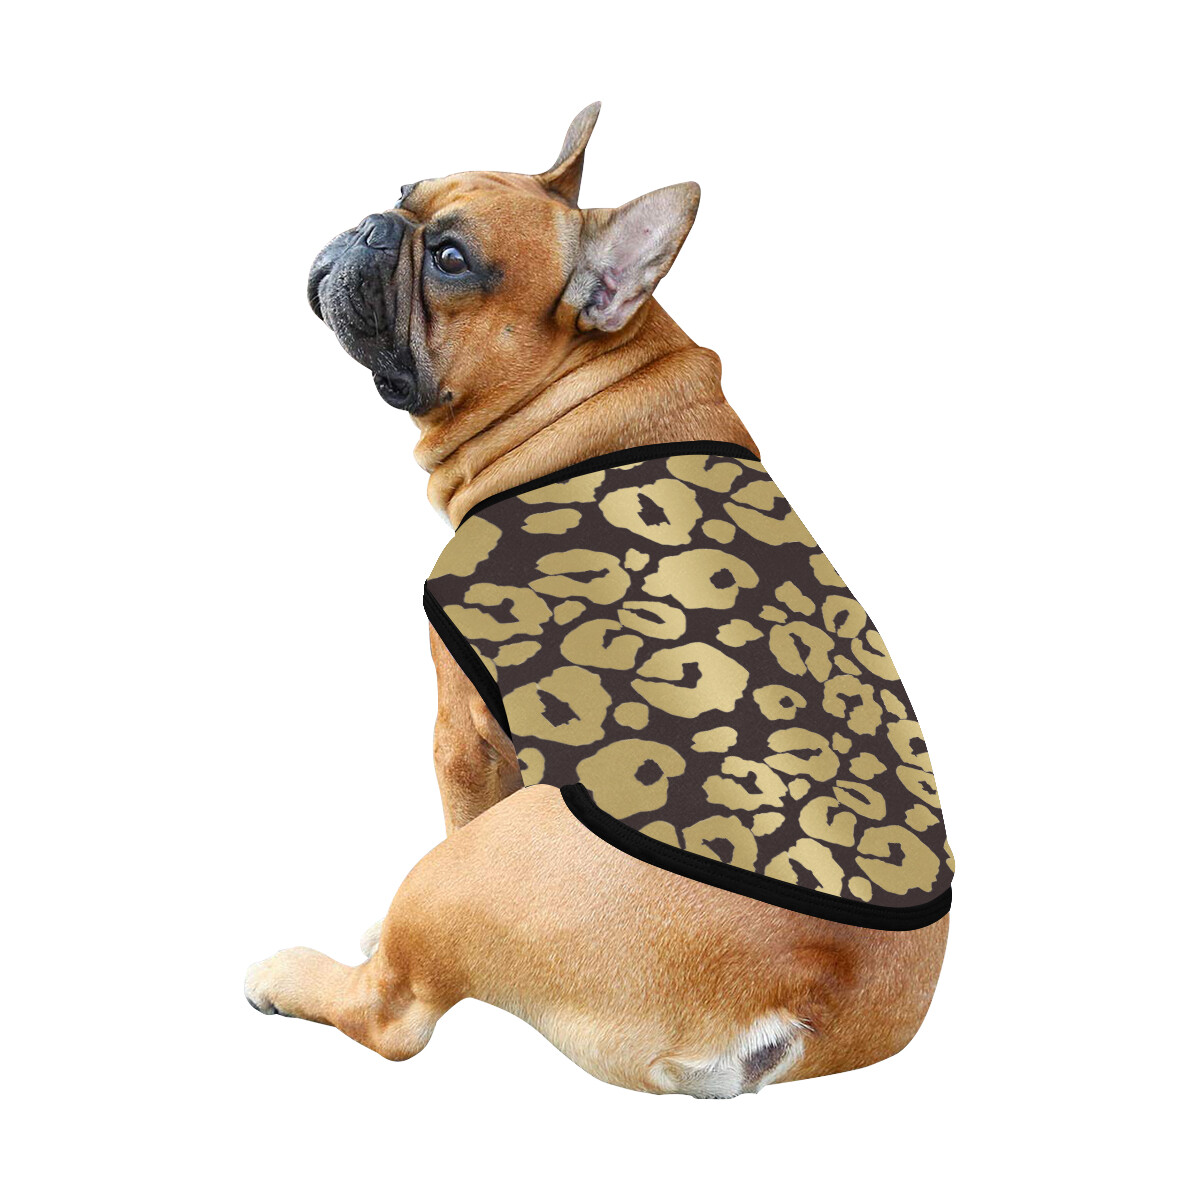 🐕 Leopard print Dog shirt, Dog Tank Top, Dog t-shirt, Dog clothes, Gifts, front back print, 7 sizes XS to 3XL, dog gifts, gold and brown